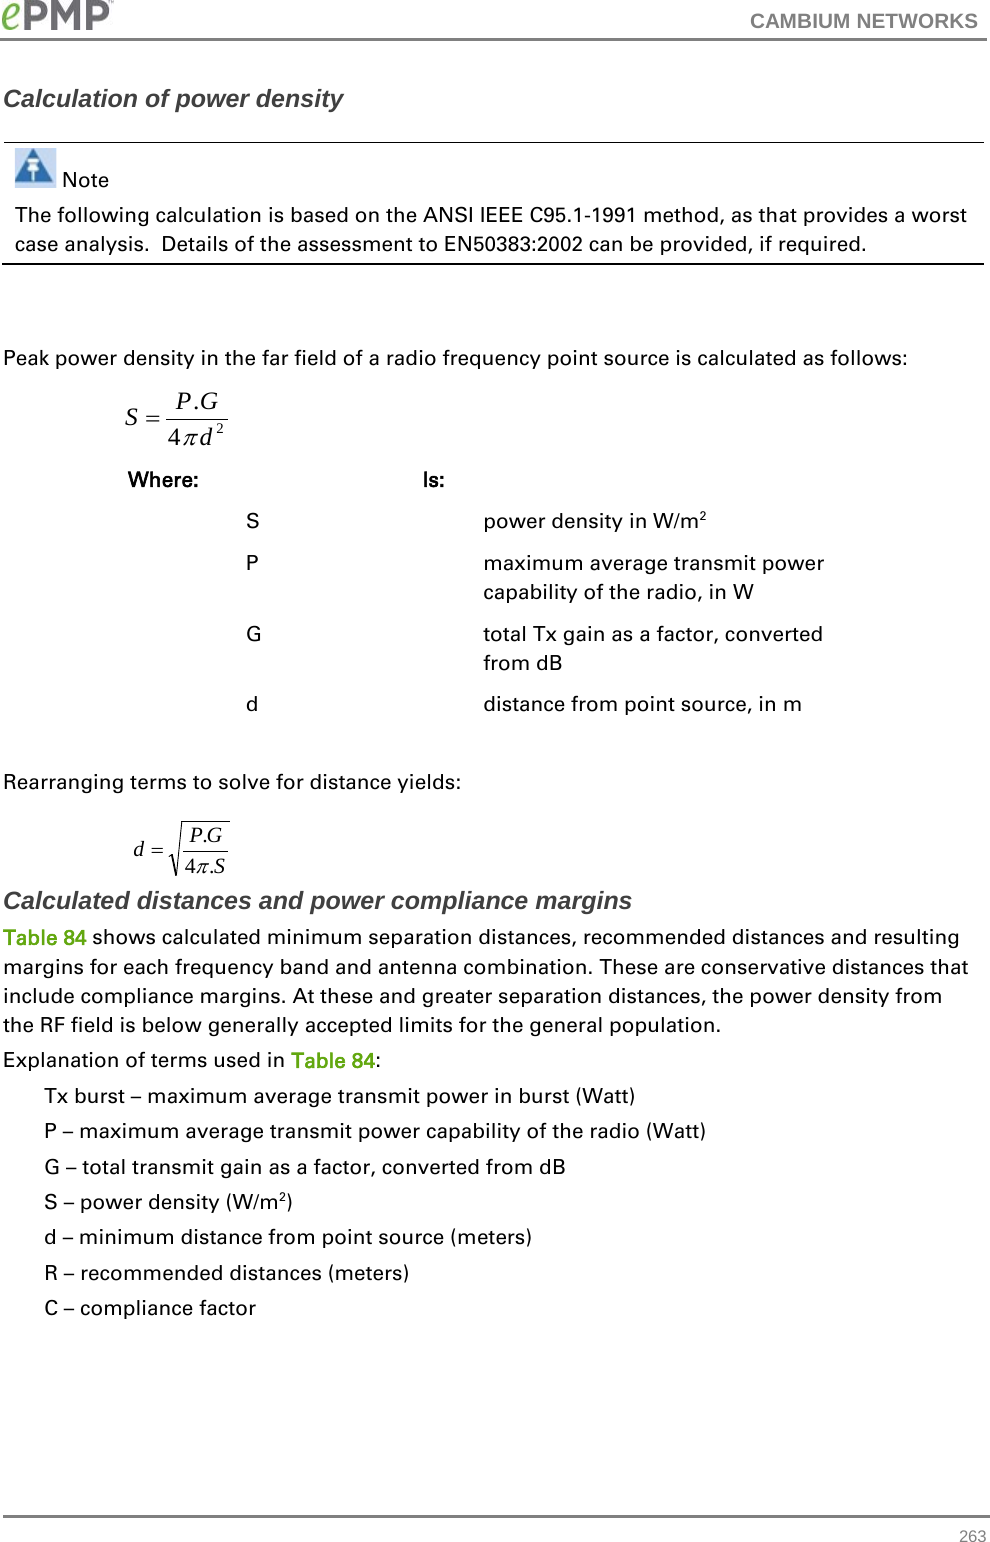 CAMBIUM NETWORKS  Calculation of power density   Note The following calculation is based on the ANSI IEEE C95.1-1991 method, as that provides a worst case analysis.  Details of the assessment to EN50383:2002 can be provided, if required.   Peak power density in the far field of a radio frequency point source is calculated as follows:    Where:  Is:    S    power density in W/m2   P    maximum average transmit power capability of the radio, in W   G    total Tx gain as a factor, converted from dB   d    distance from point source, in m  Rearranging terms to solve for distance yields:   Calculated distances and power compliance margins Table 84 shows calculated minimum separation distances, recommended distances and resulting margins for each frequency band and antenna combination. These are conservative distances that include compliance margins. At these and greater separation distances, the power density from the RF field is below generally accepted limits for the general population. Explanation of terms used in Table 84: Tx burst – maximum average transmit power in burst (Watt) P – maximum average transmit power capability of the radio (Watt) G – total transmit gain as a factor, converted from dB S – power density (W/m2) d – minimum distance from point source (meters) R – recommended distances (meters) C – compliance factor    24.dGPSπ=SGPd.4.π= 263 